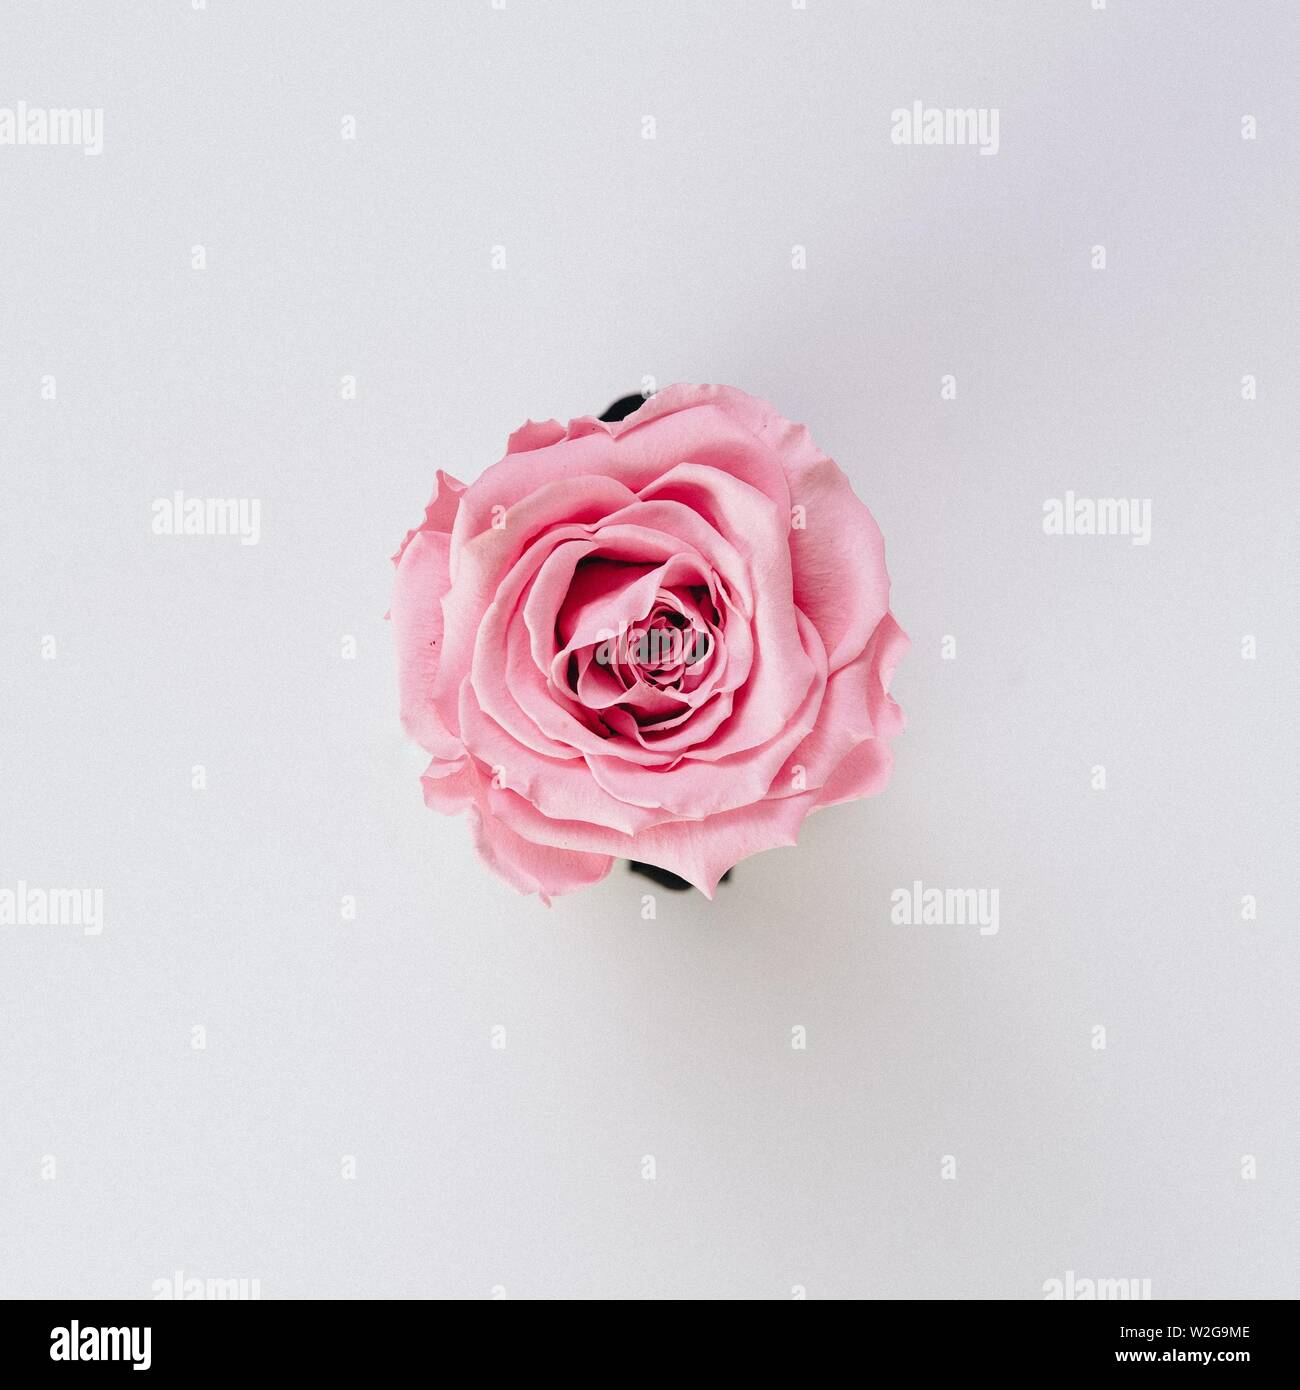 A Beautiful Single Isolated Pink Rose On A Pure White Background Perfect Wallpaper Stock Photo Alamy,Furniture Arrangement Rectangular Small Narrow Living Room Ideas